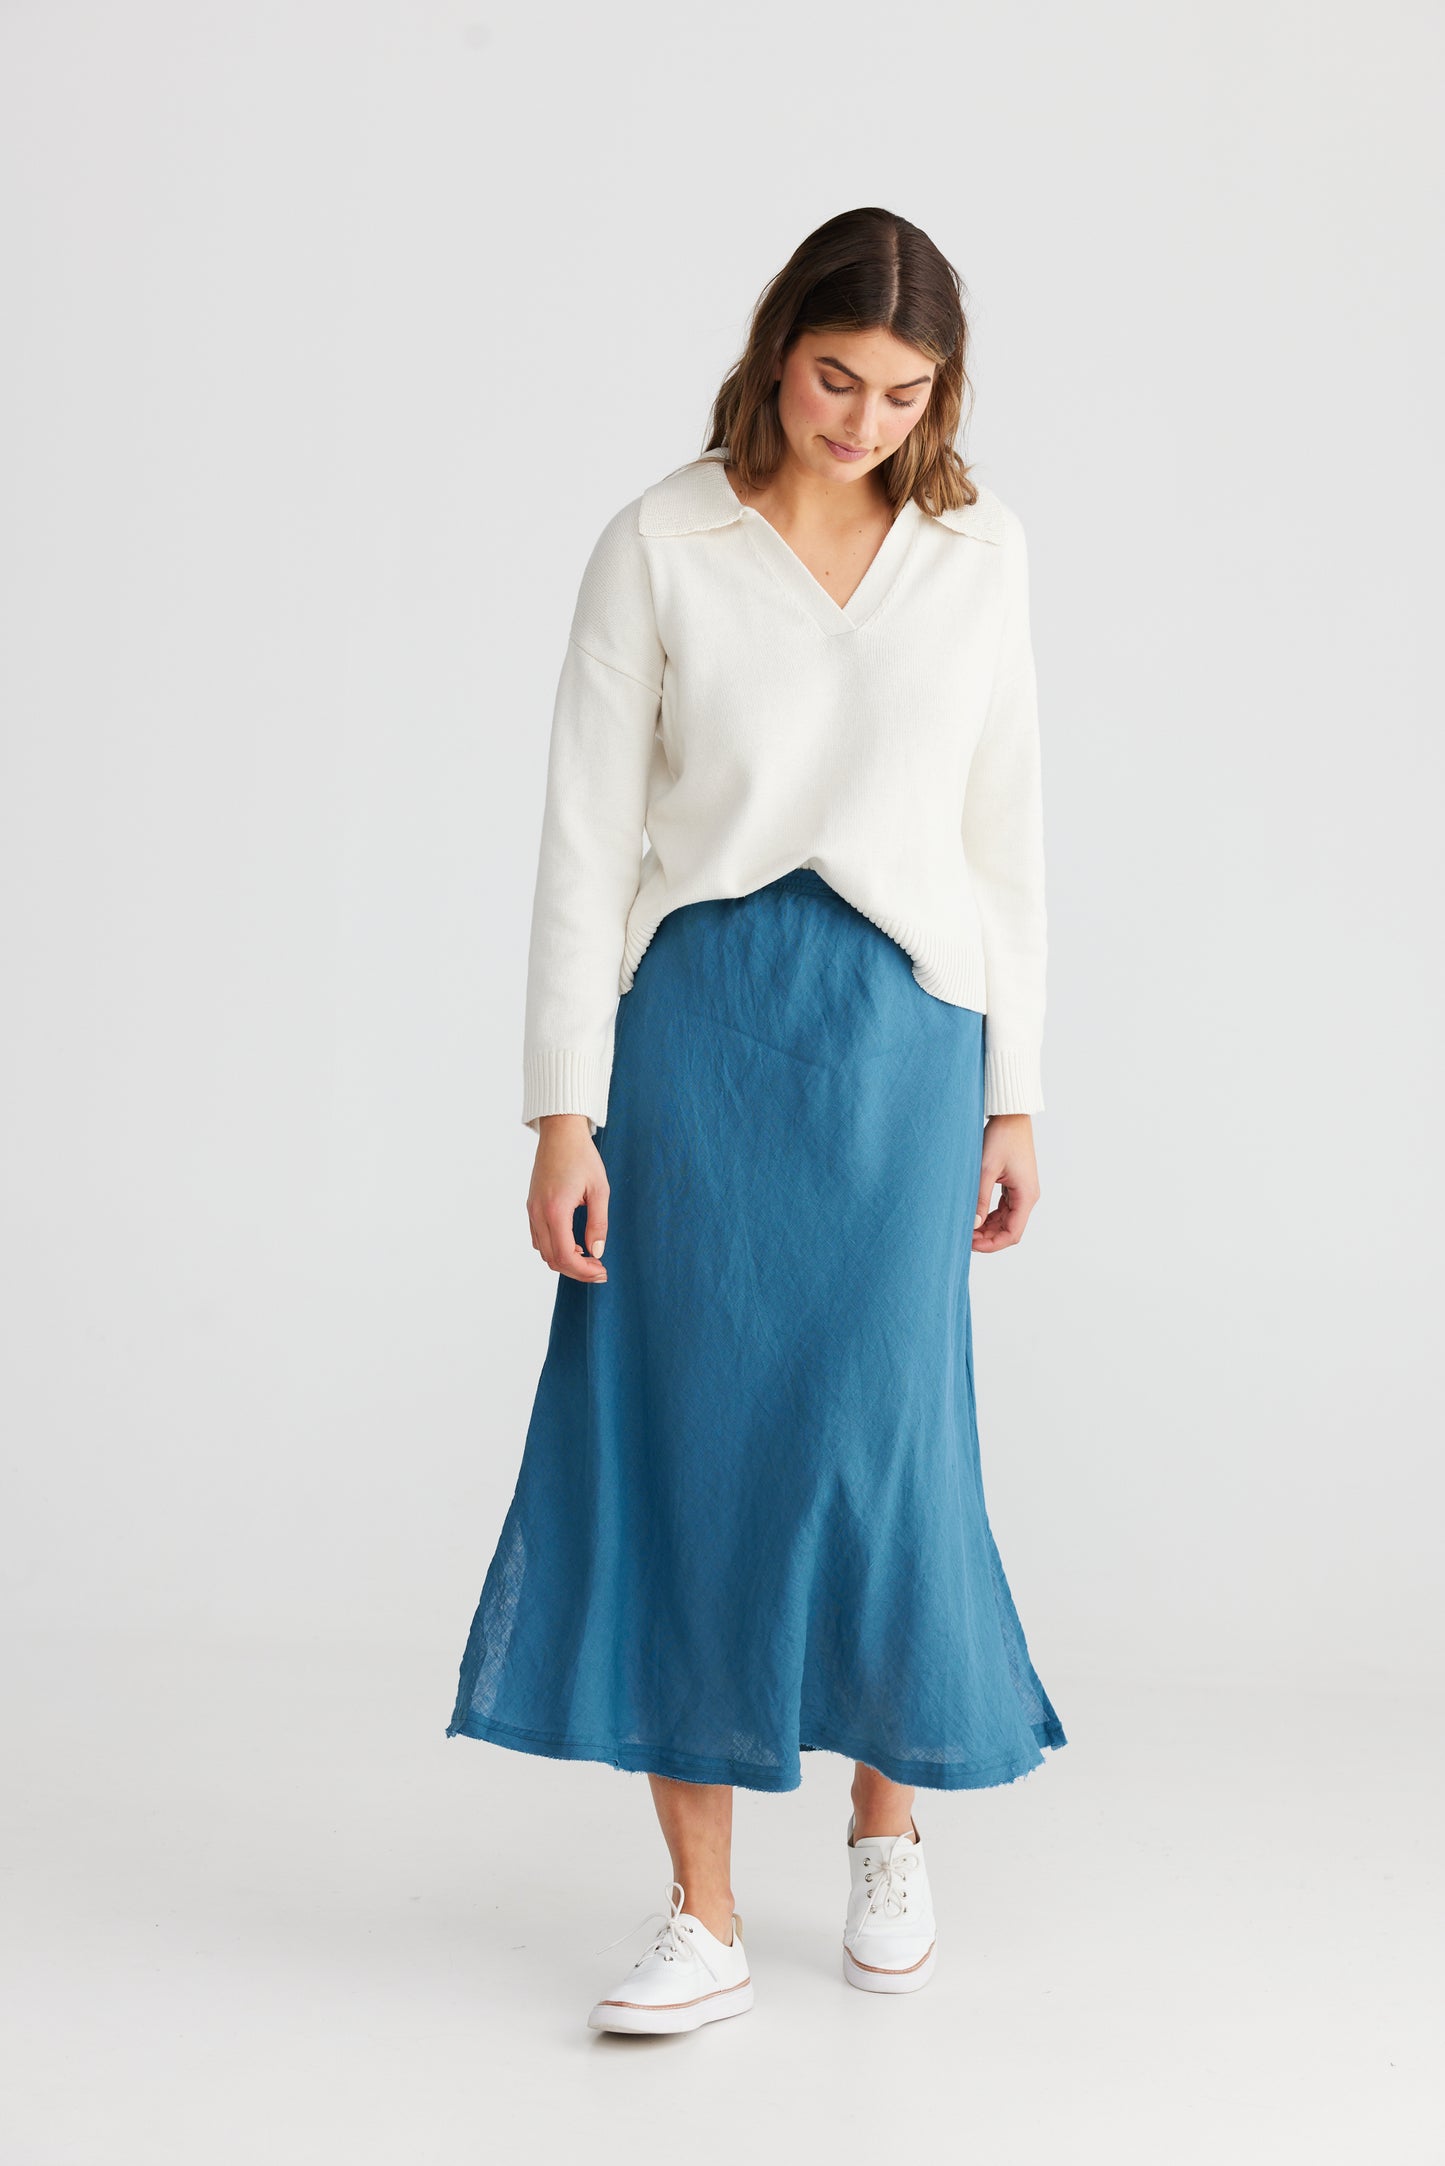 Sicily Skirt - 40% OFF AT CHECKOUT